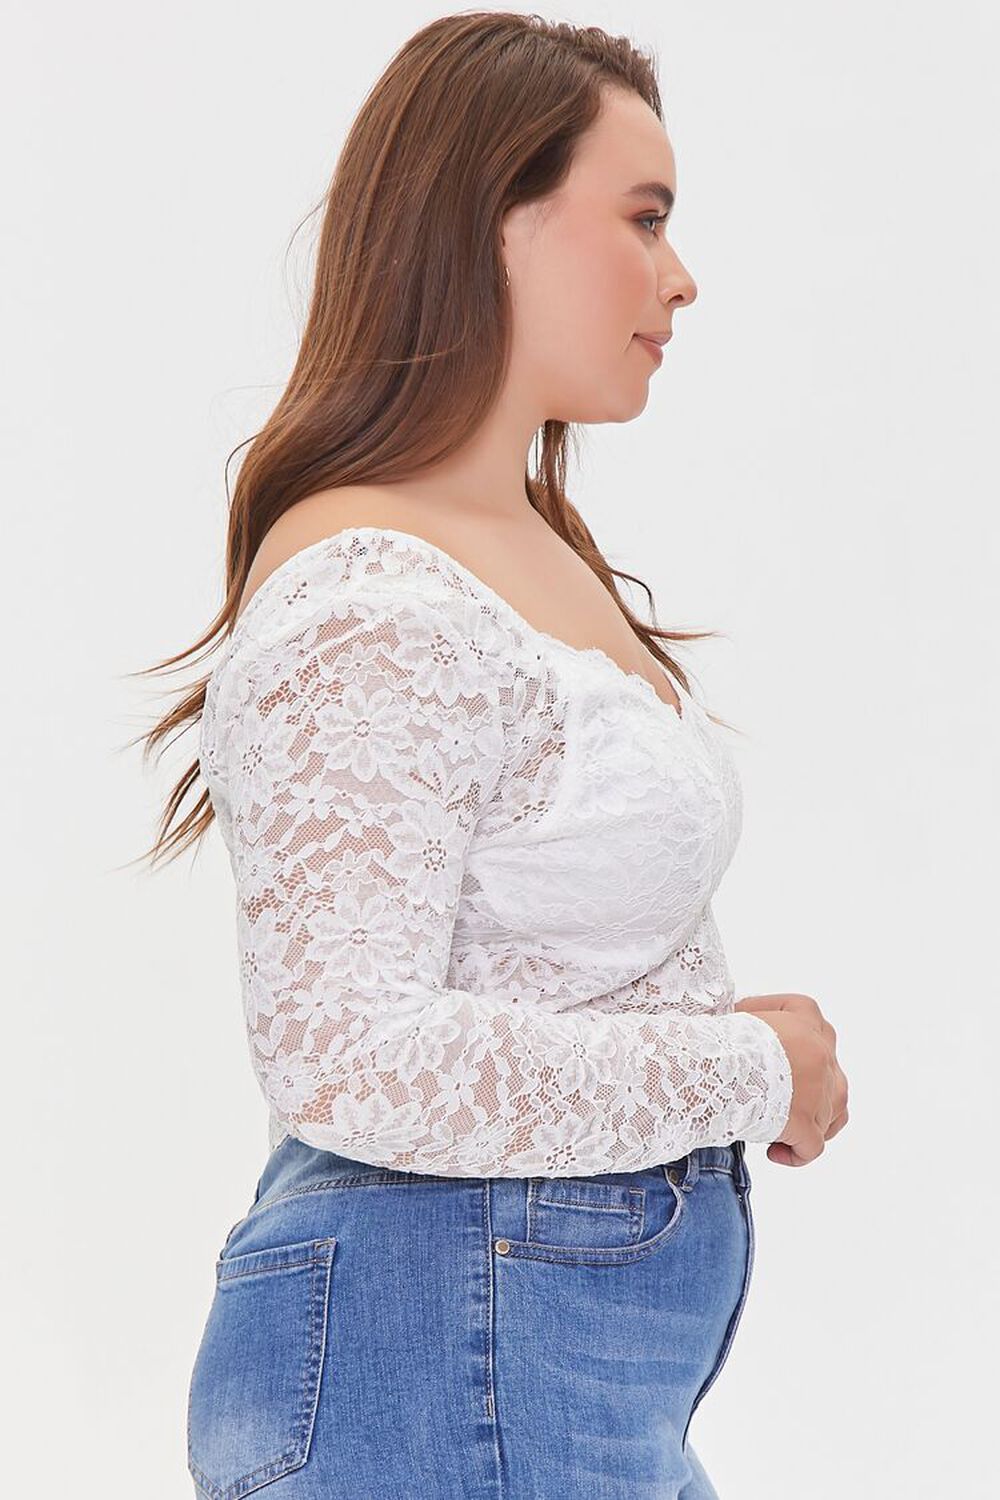 IVORY Plus Size Sheer Lace Crop Top, image 2